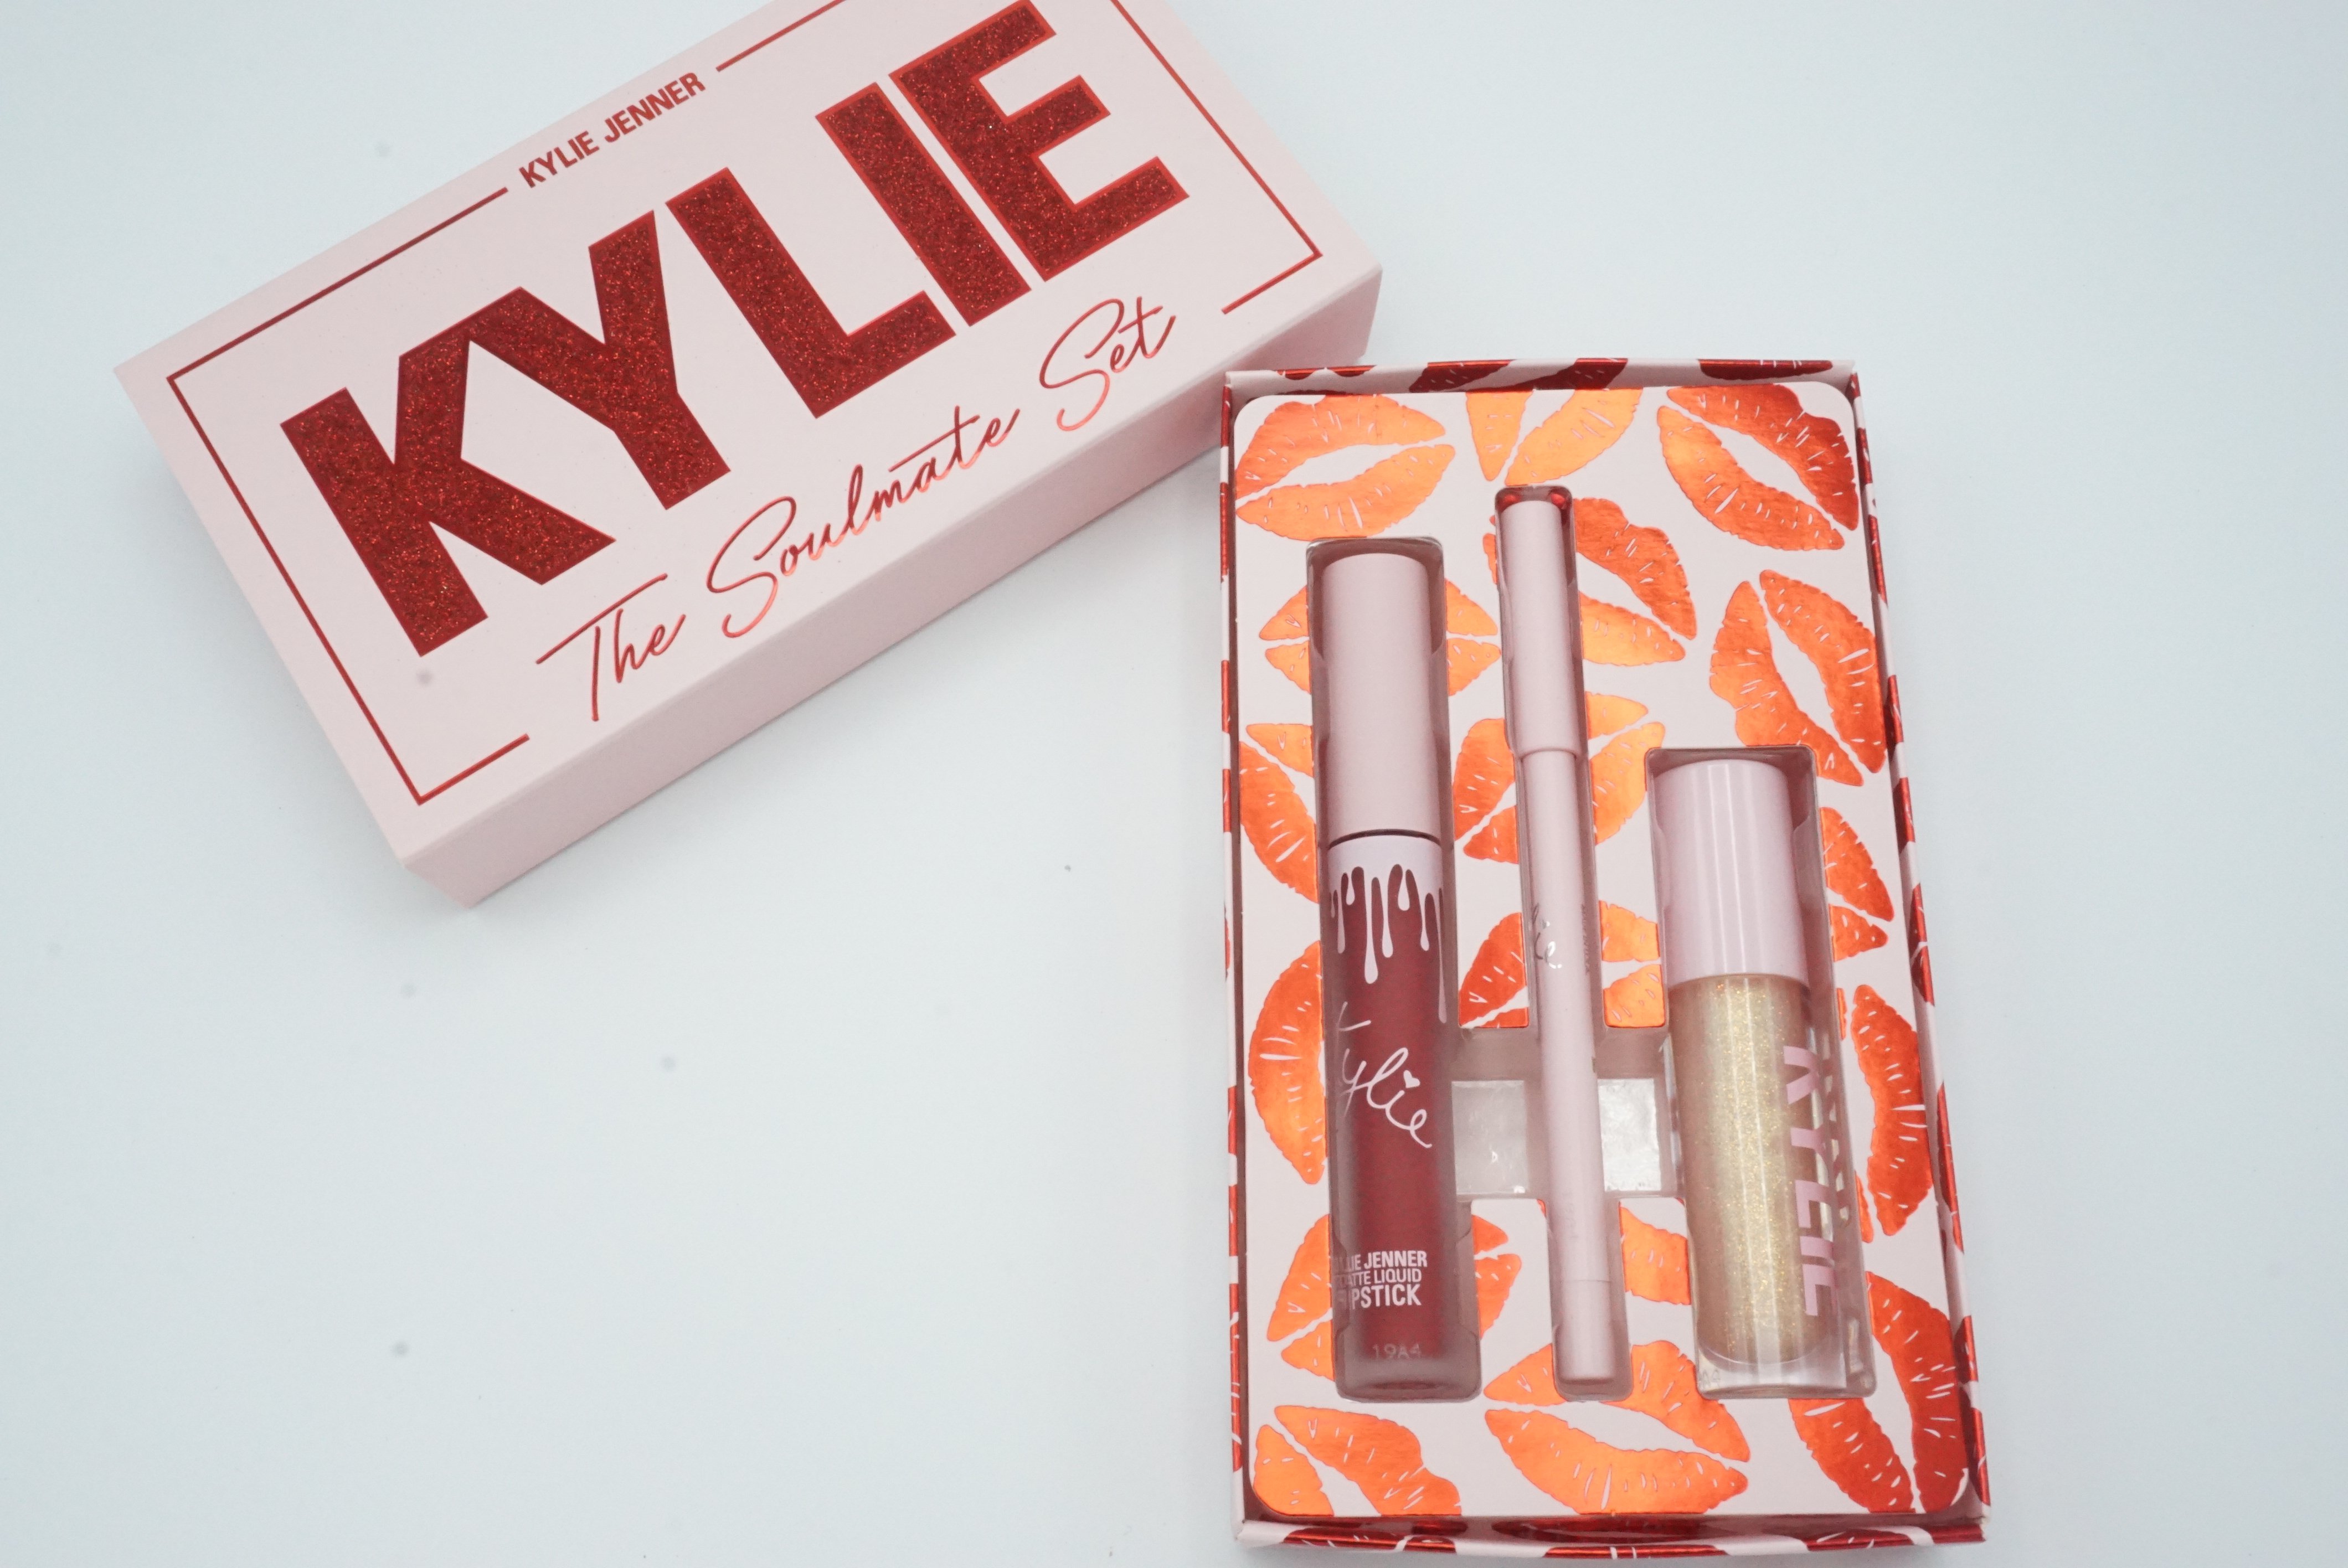 Kylie Cosmetics Valentine Collection 2019 | Review